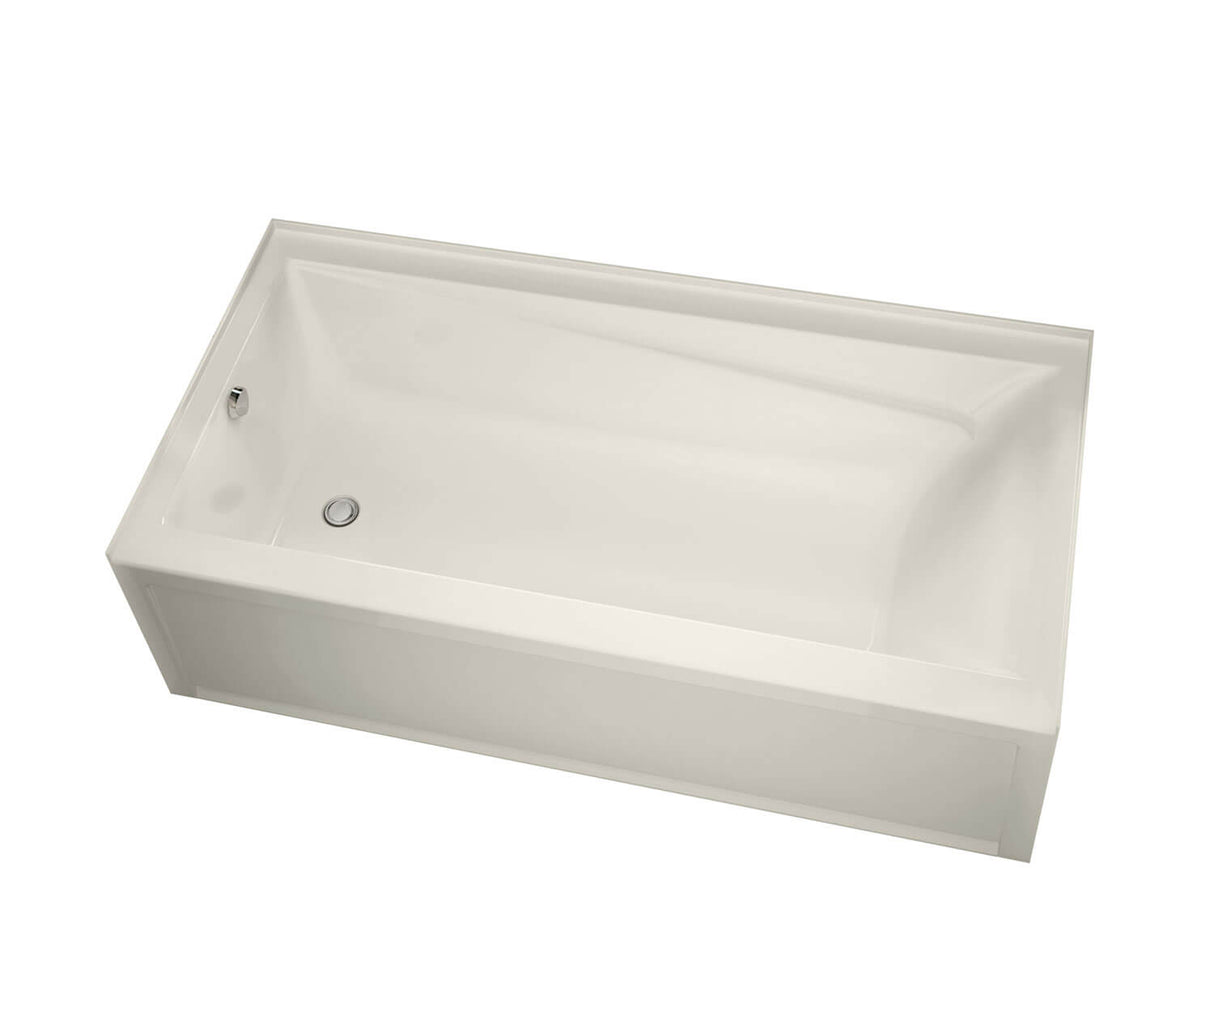 MAAX 106184-R-103-007 Exhibit 7236 IFS AFR Acrylic Alcove Right-Hand Drain Aeroeffect Bathtub in Biscuit